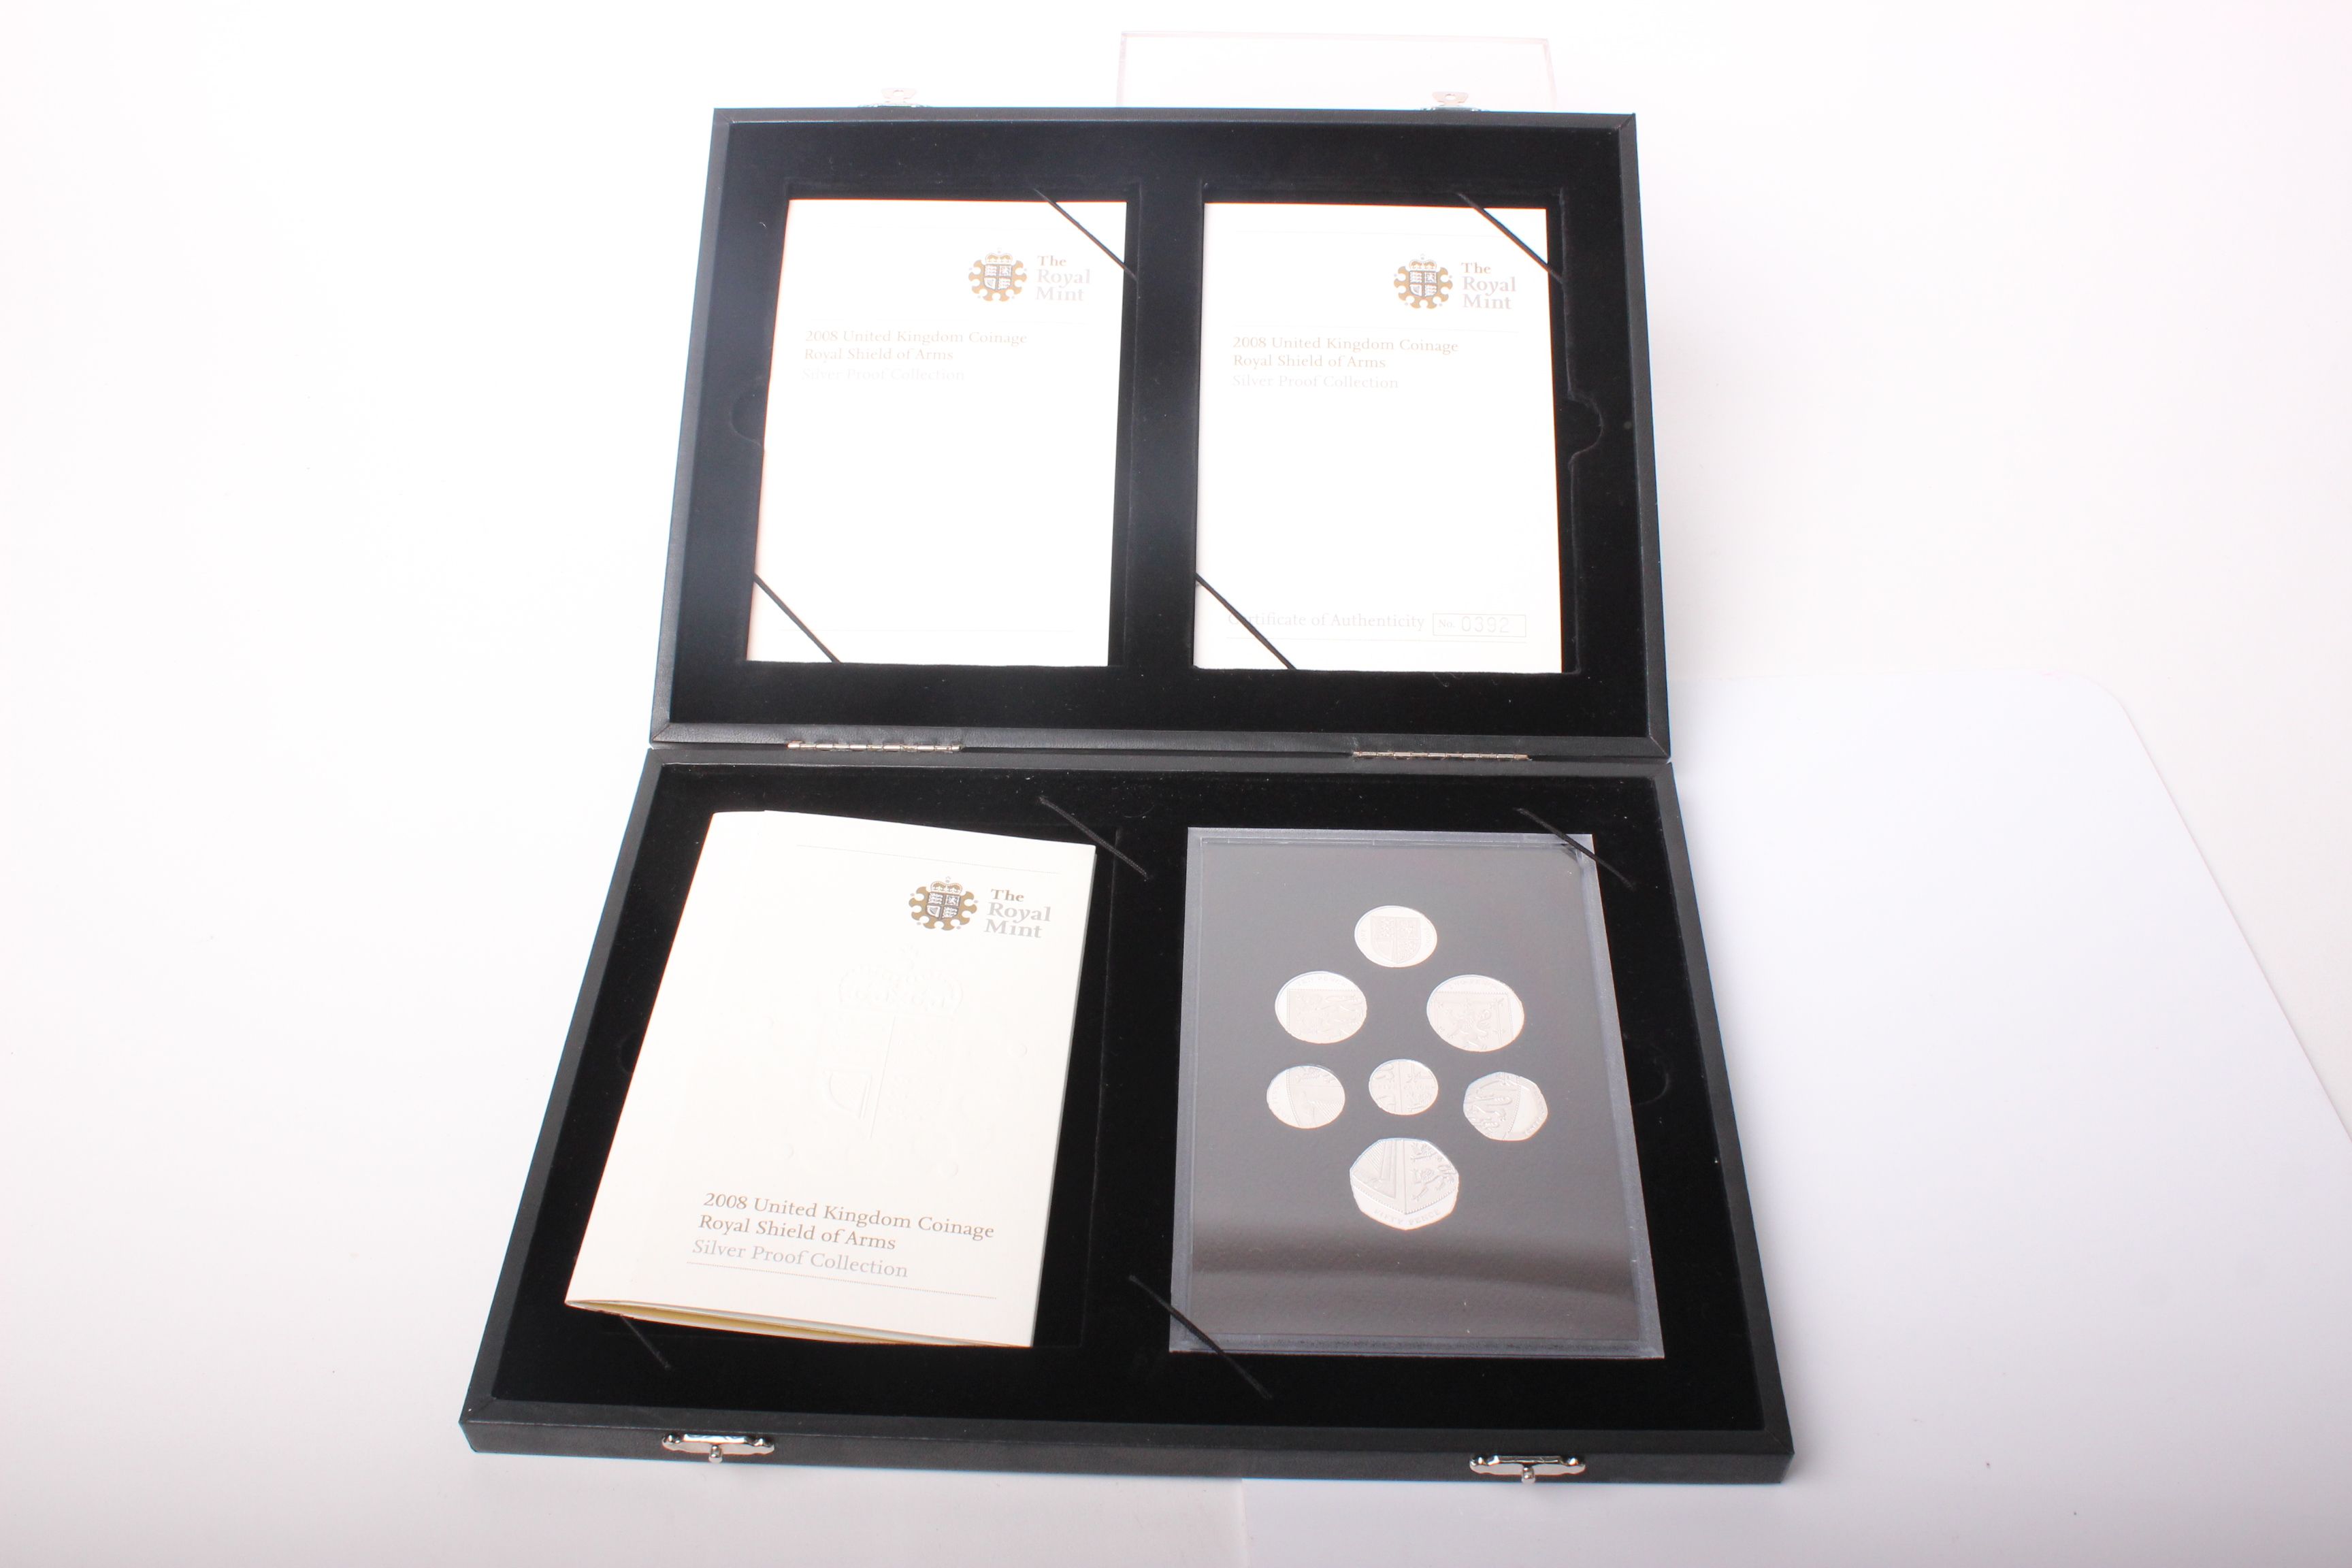 Royal Mint 2008 UK silver proof (.925 sterling) Royal Shield of Arms 7 coin set 42.93 grams (1.4oz). - Image 2 of 2